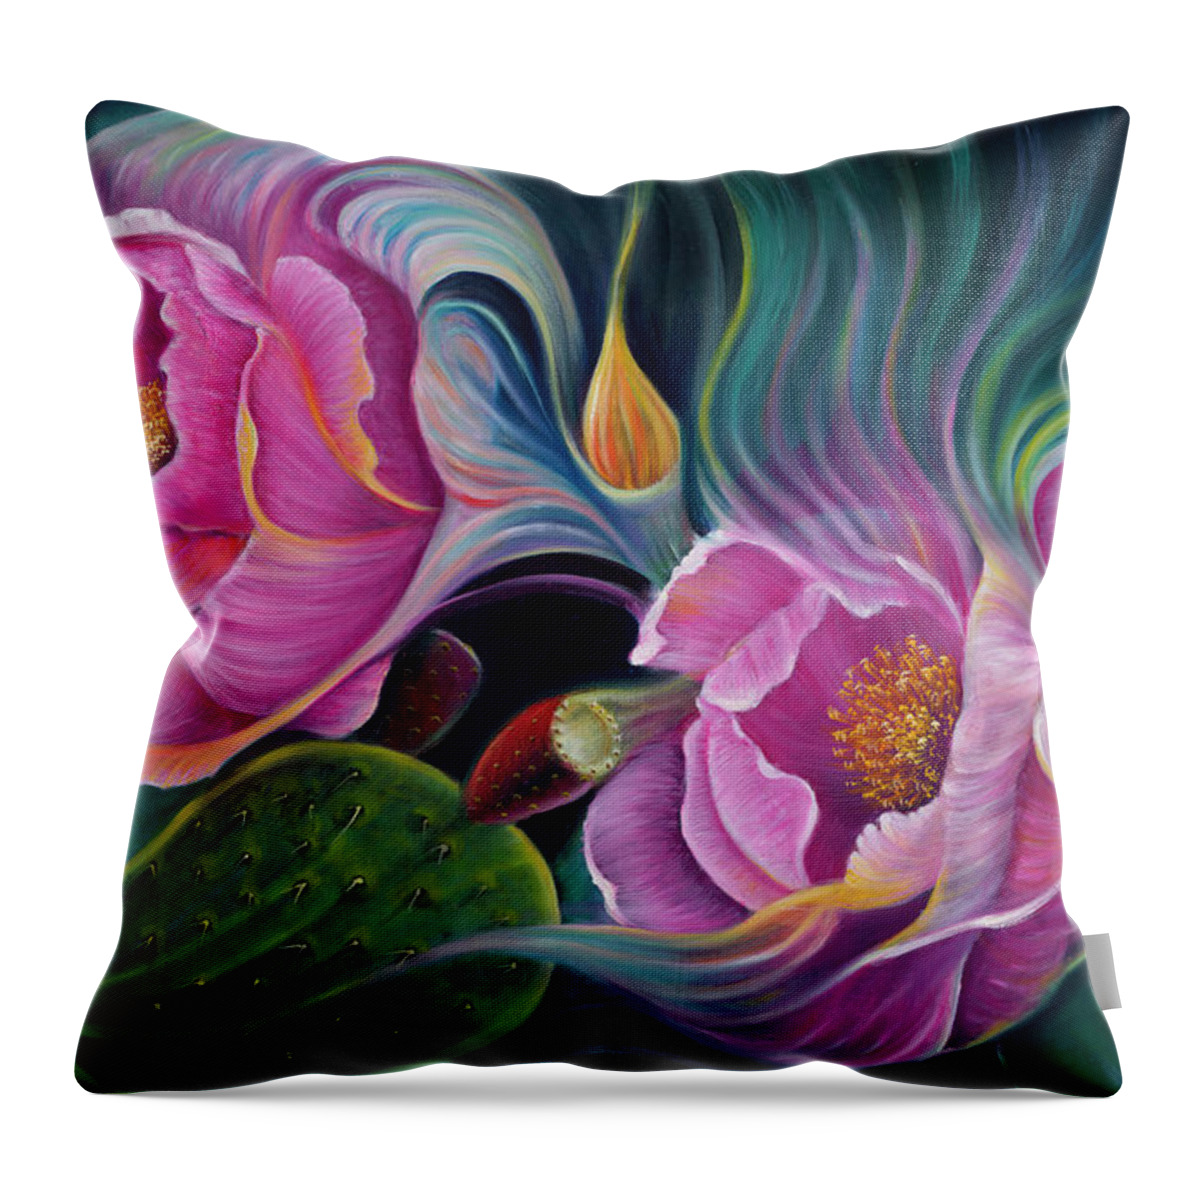 Flower Throw Pillow featuring the painting Enchanted Blossoms by Claudia Goodell